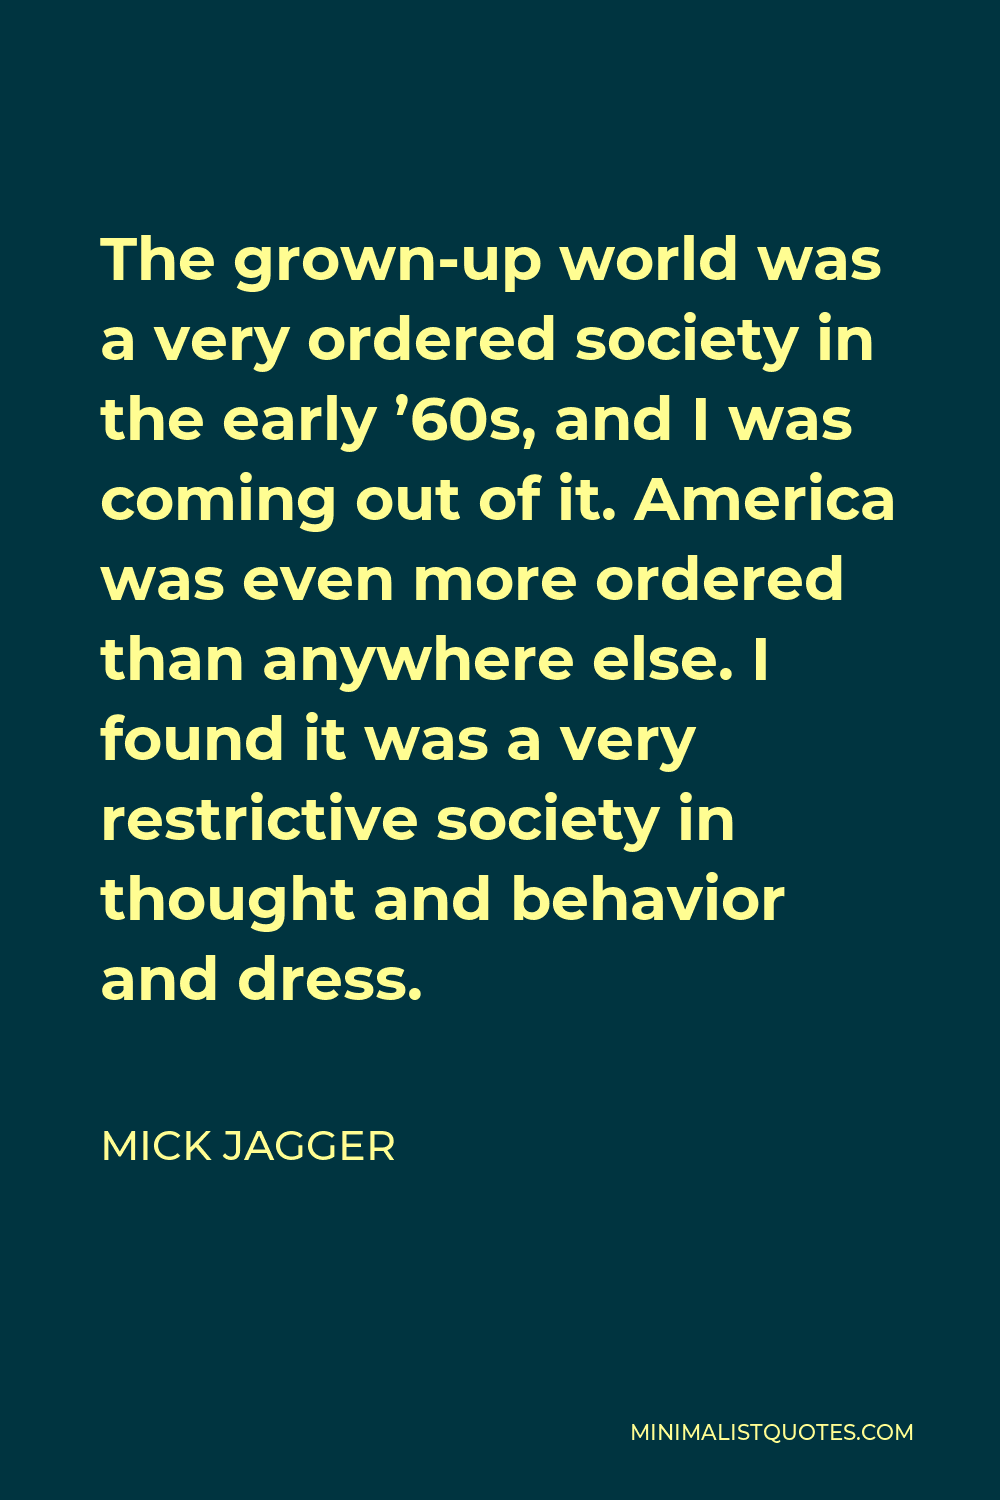 Mick Jagger Quote - The grown-up world was a very ordered society in the early ’60s, and I was coming out of it. America was even more ordered than anywhere else. I found it was a very restrictive society in thought and behavior and dress.